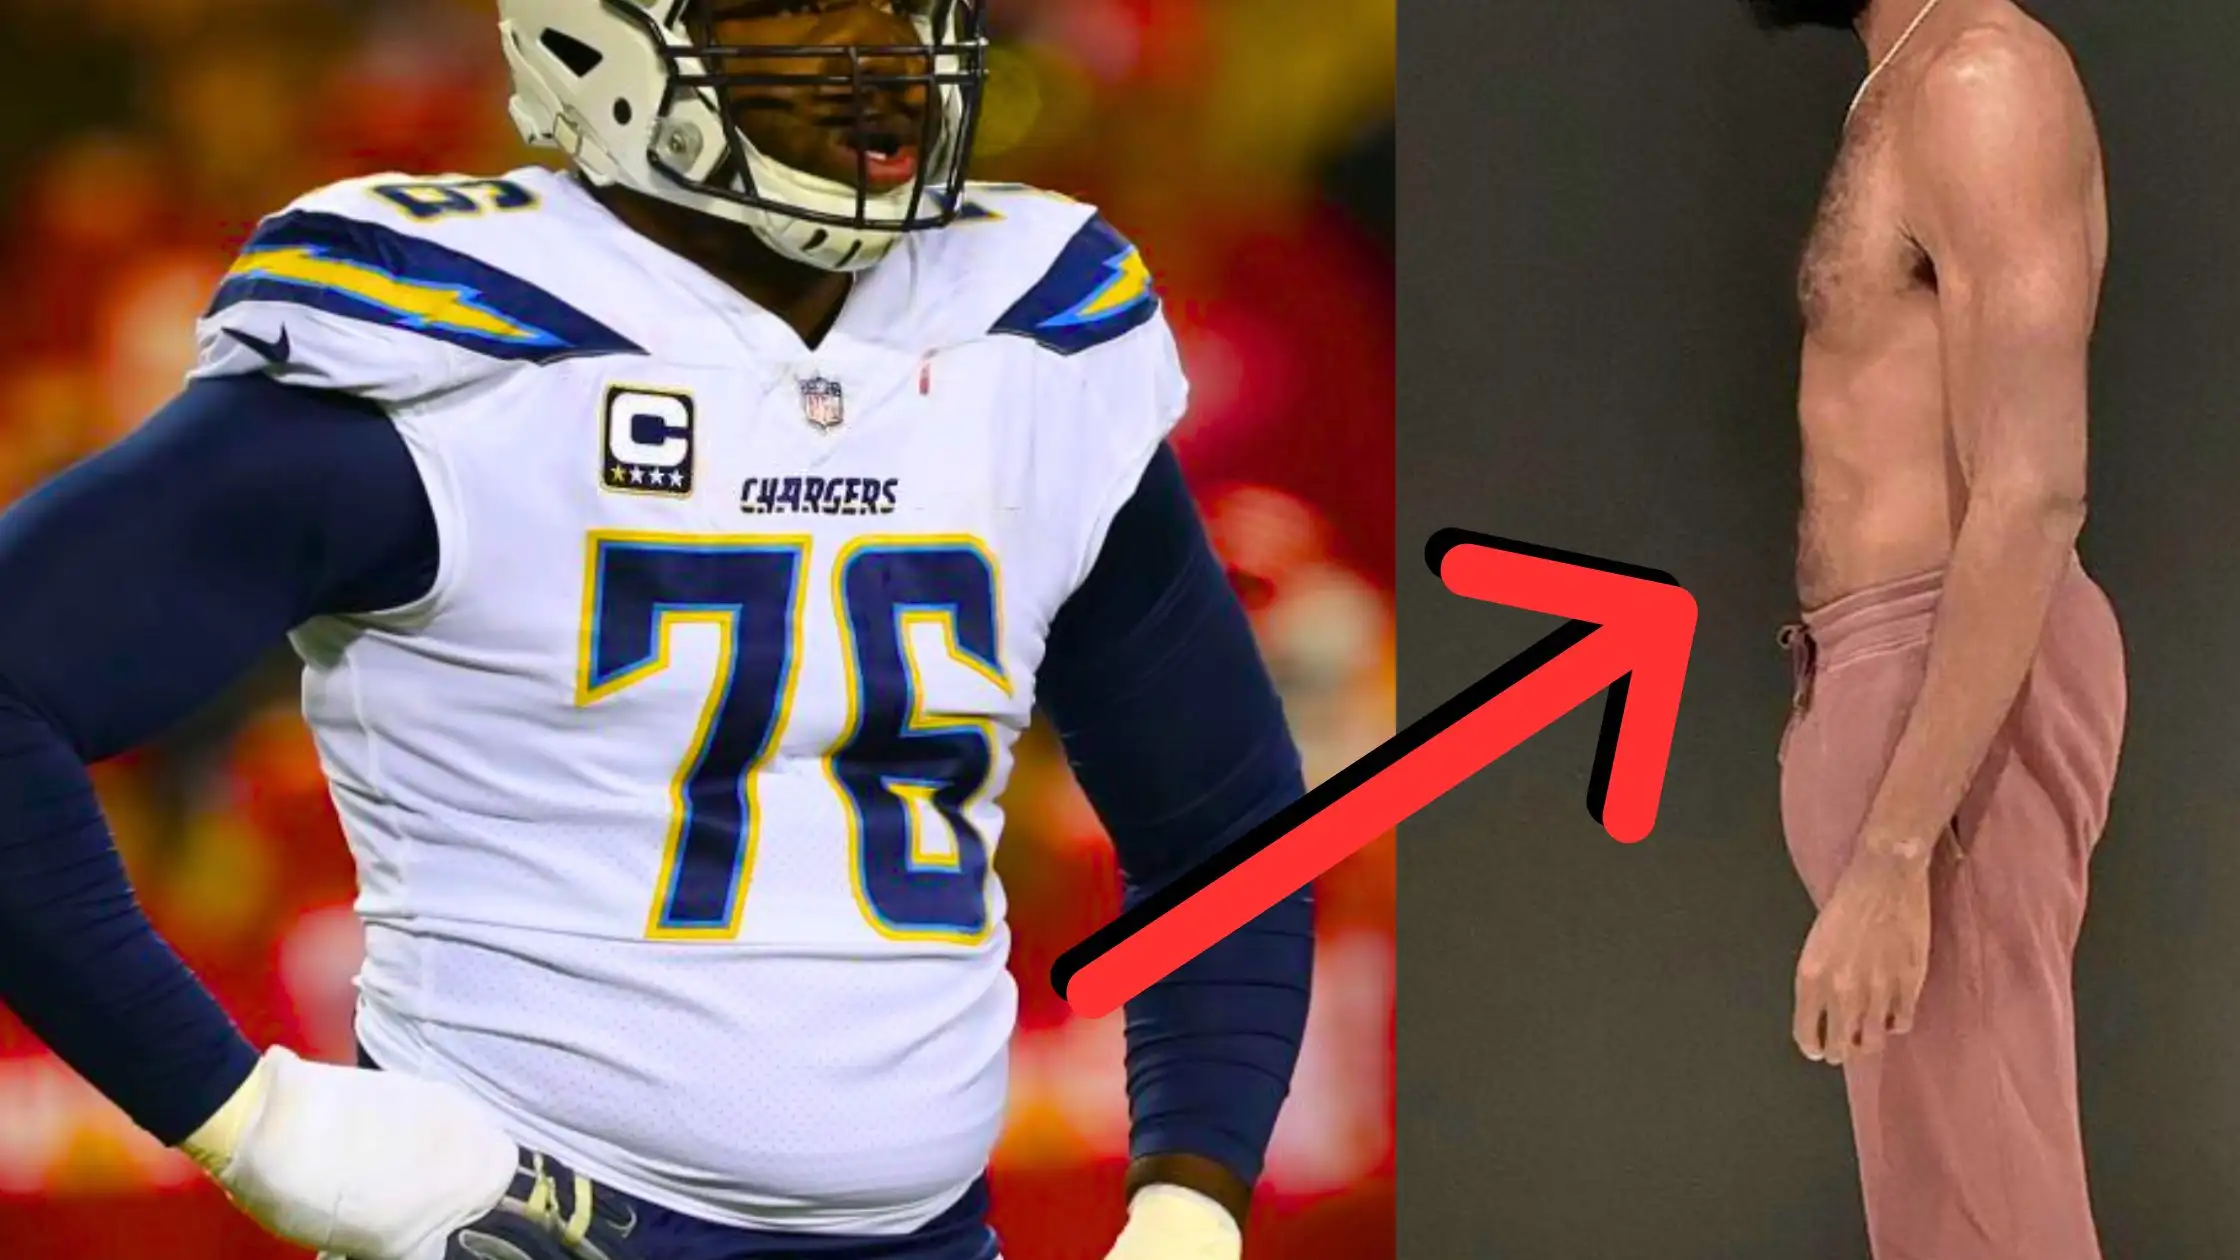 Russell Okung Drops A Major Share Of Pounds